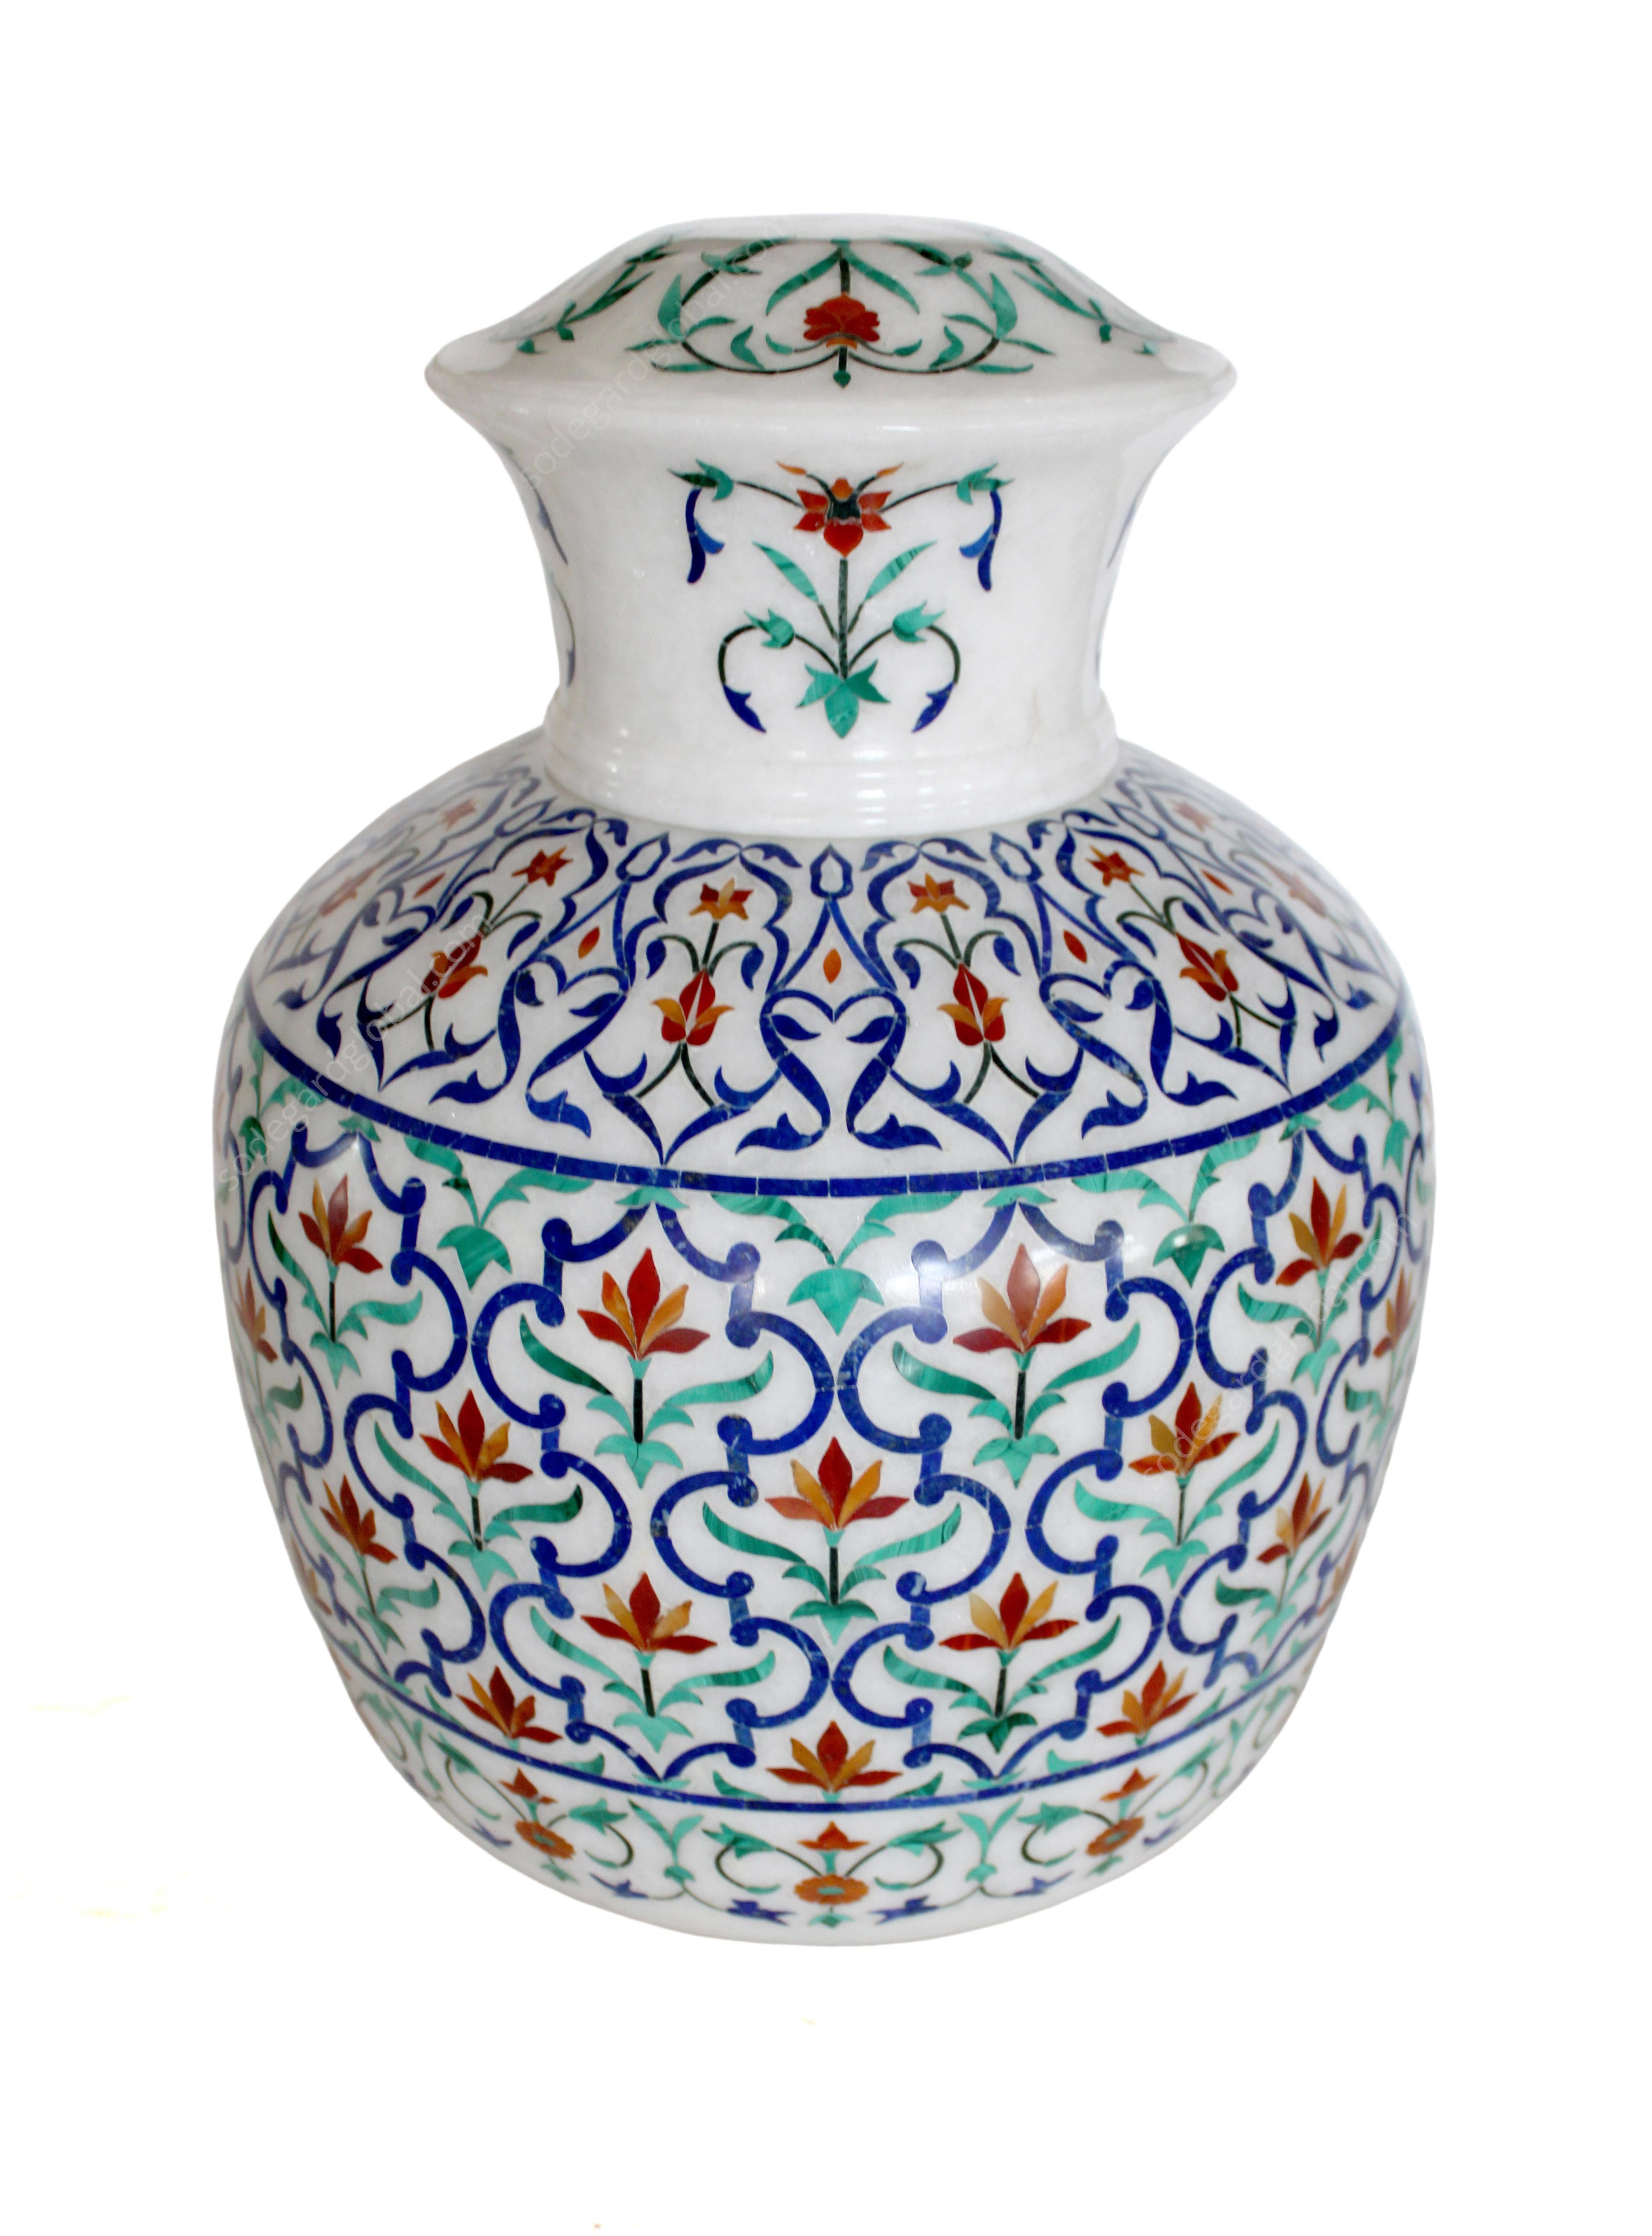 This stunning vase exhibits one of the most striking motifs of the mughal architecture in India. Numerous semiprecious stones are inlaid on the whitest of the marble using the centuries old technique of pietra dura / pacchikari. Each piece of Semi